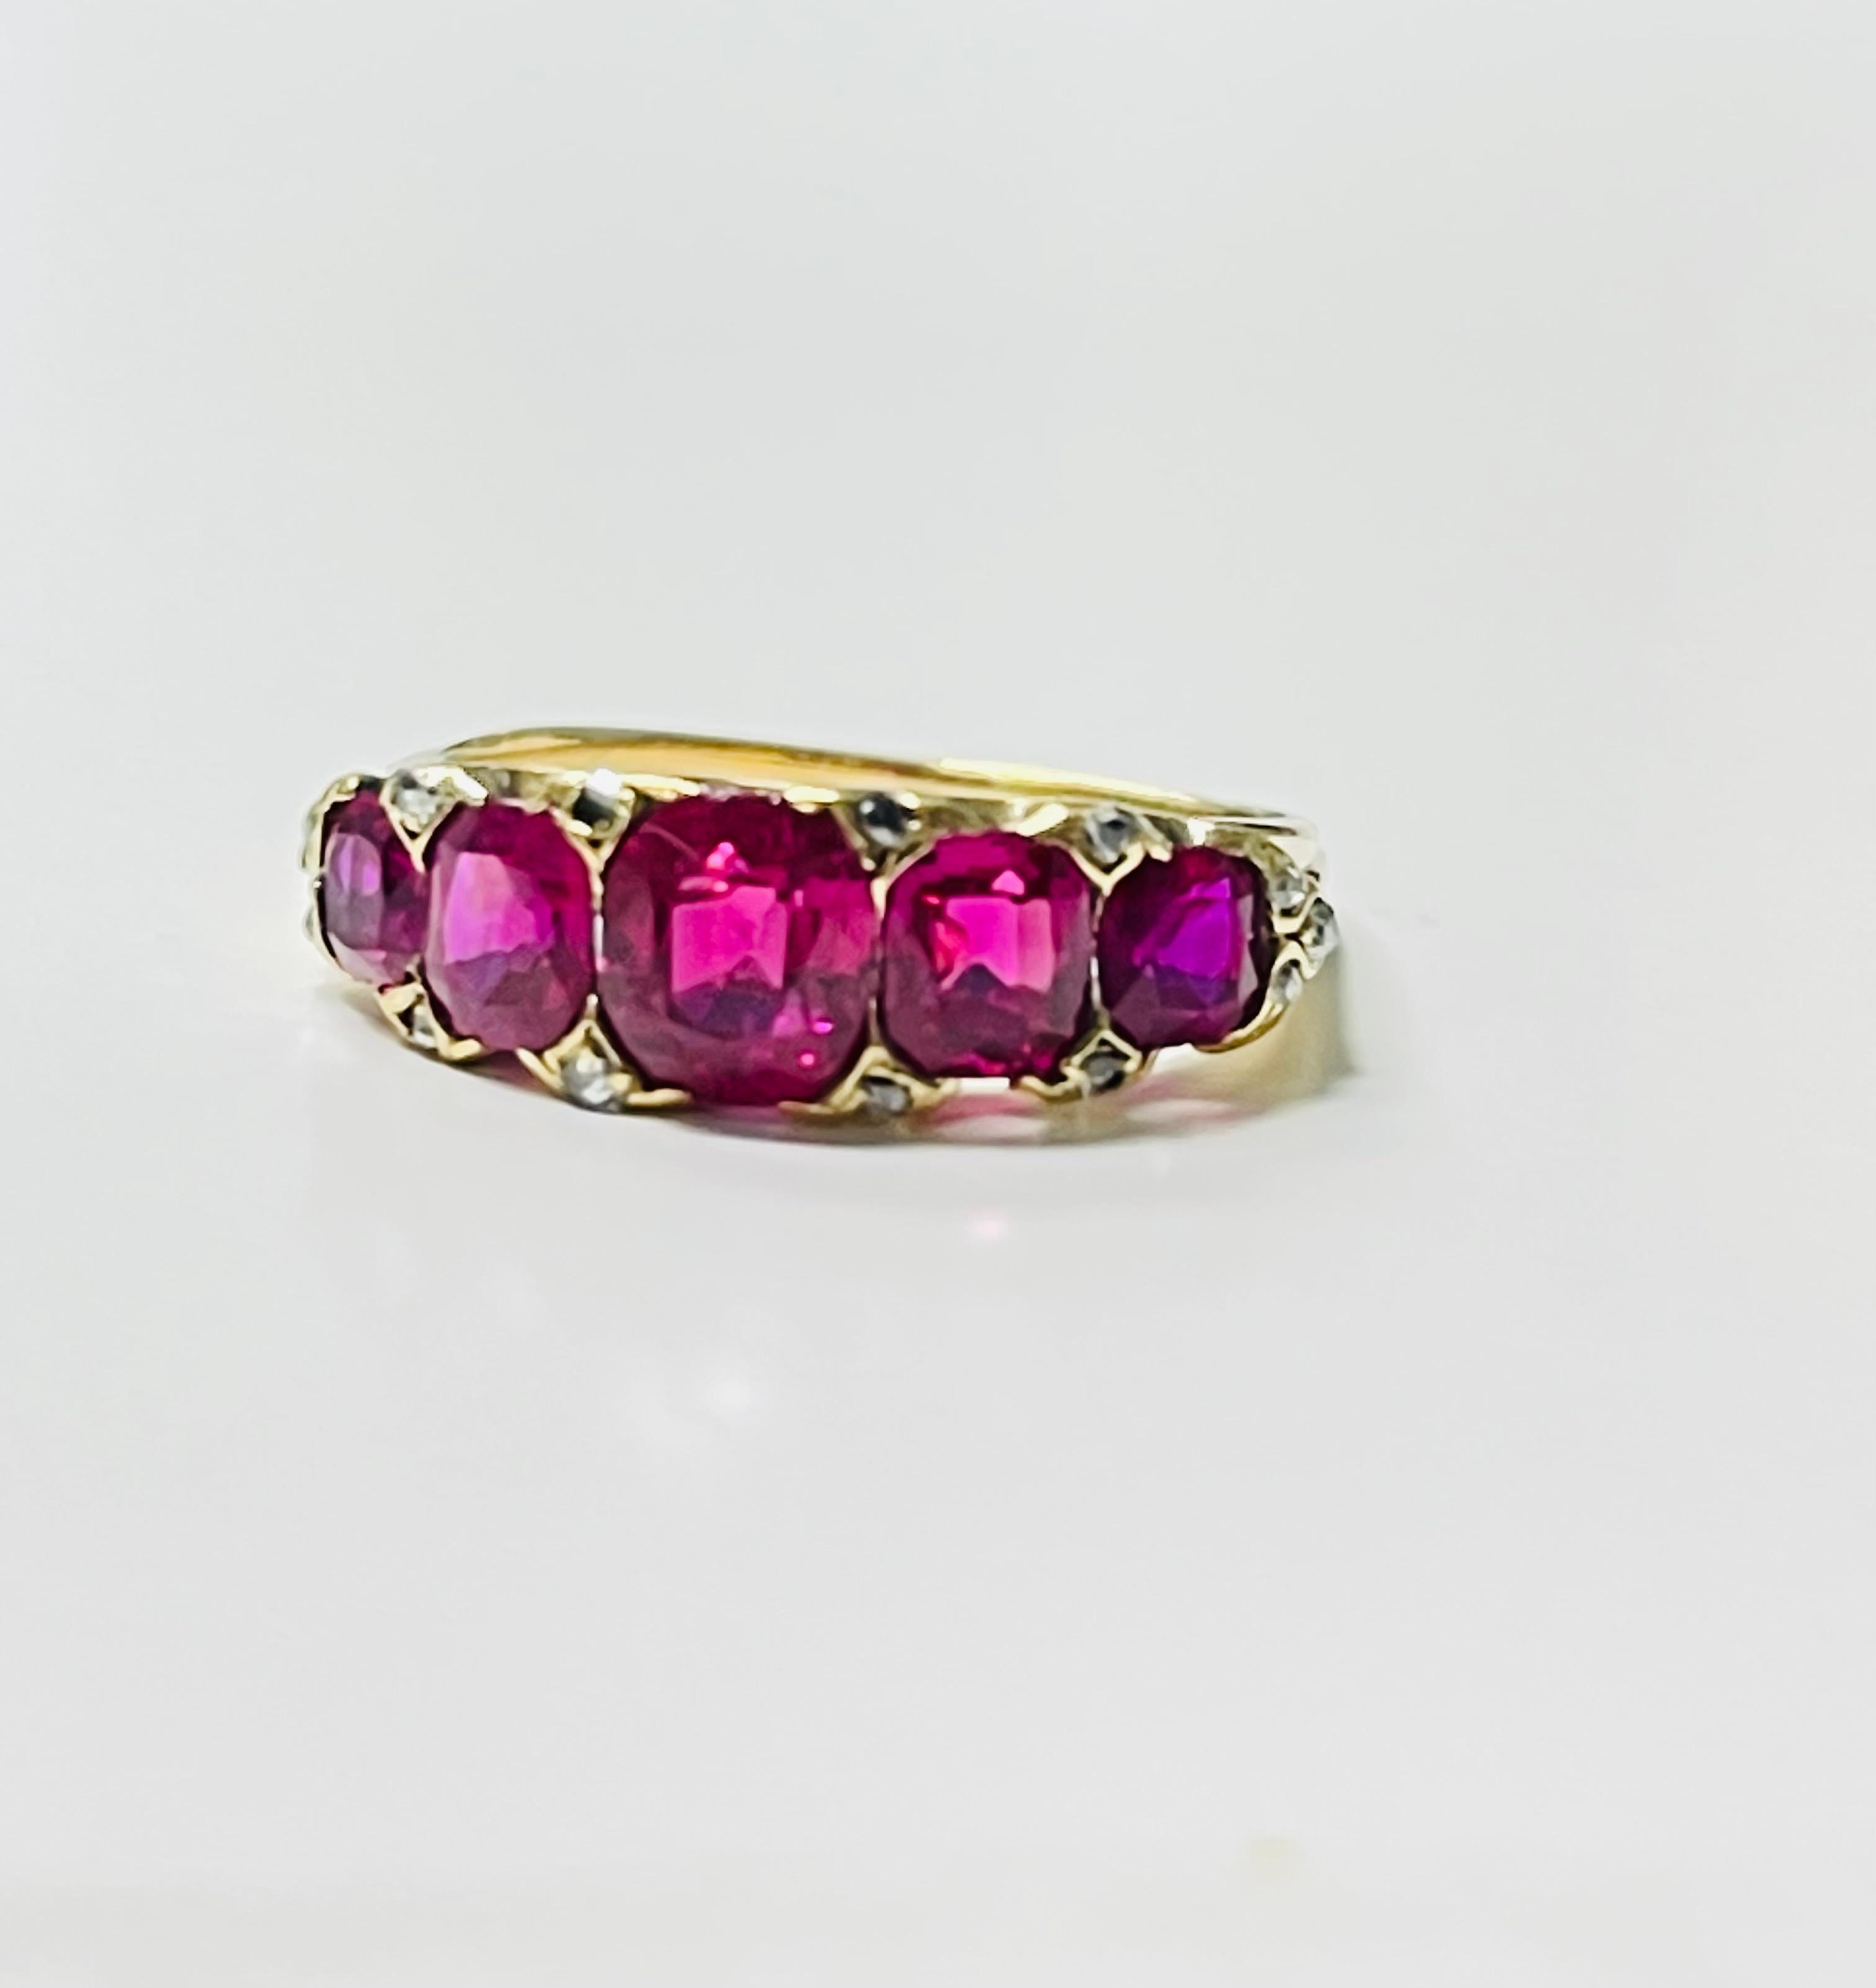 GIA Certified Antique Burma No Heat Ruby And Rose Cut Diamond Band Ring In 18K.  4